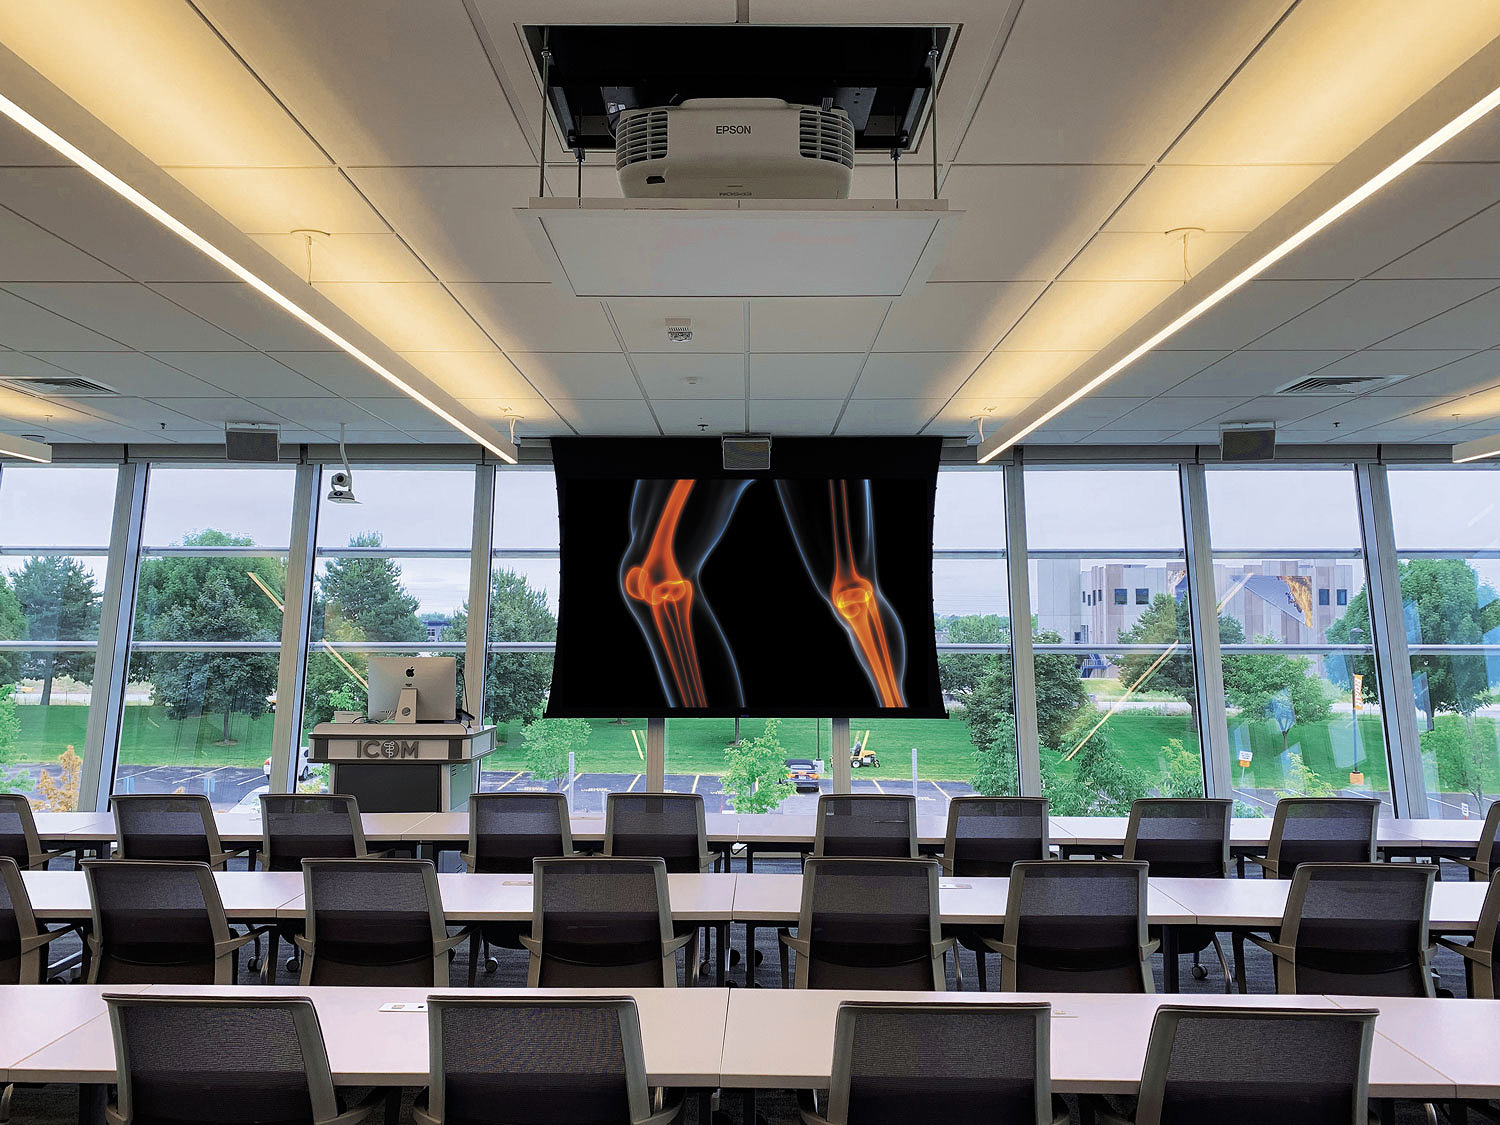 The Glassroom classroom has three all-glass walls, requiring precise AV system design and installation to allow for high-quality image display and minimimize audio reflections.